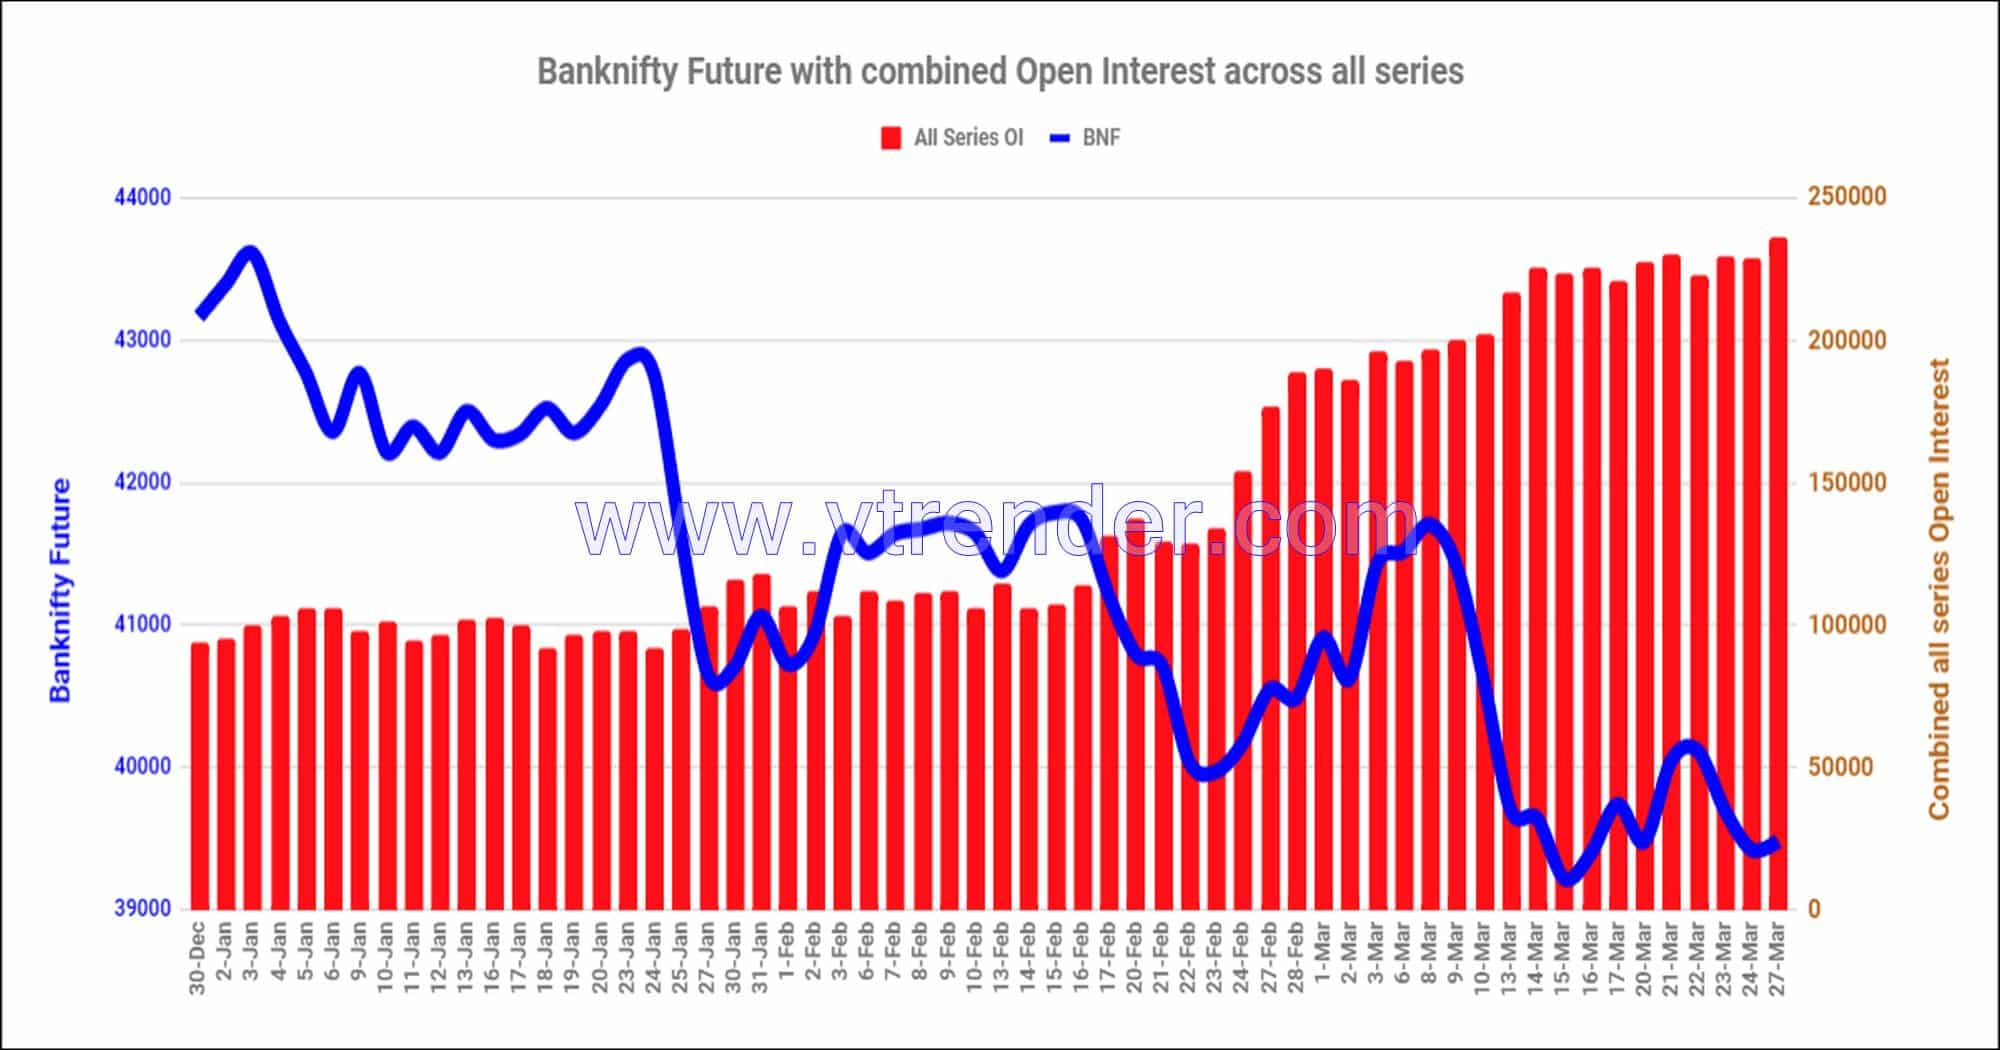 Bnf27Mar Nifty And Banknifty Futures With All Series Combined Open Interest – 27Th Mar 2023 Banknifty, Nifty, Open Interest